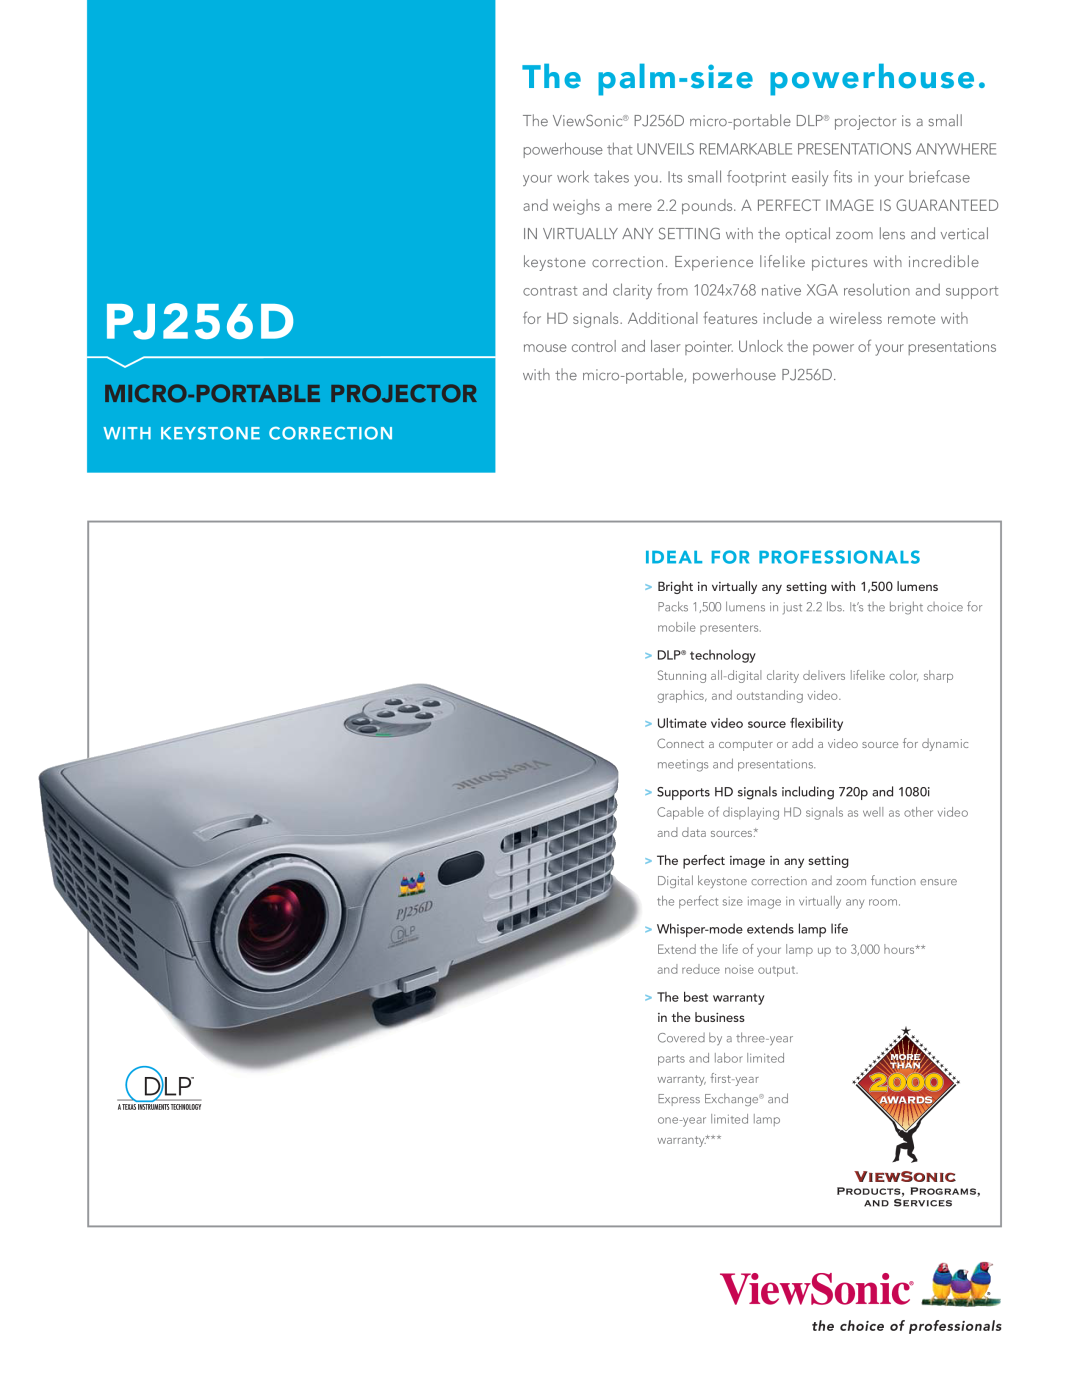 ViewSonic PJ256D warranty The palm-sizepowerhouse, Micro-Portableprojector, Ideal For Professionals 